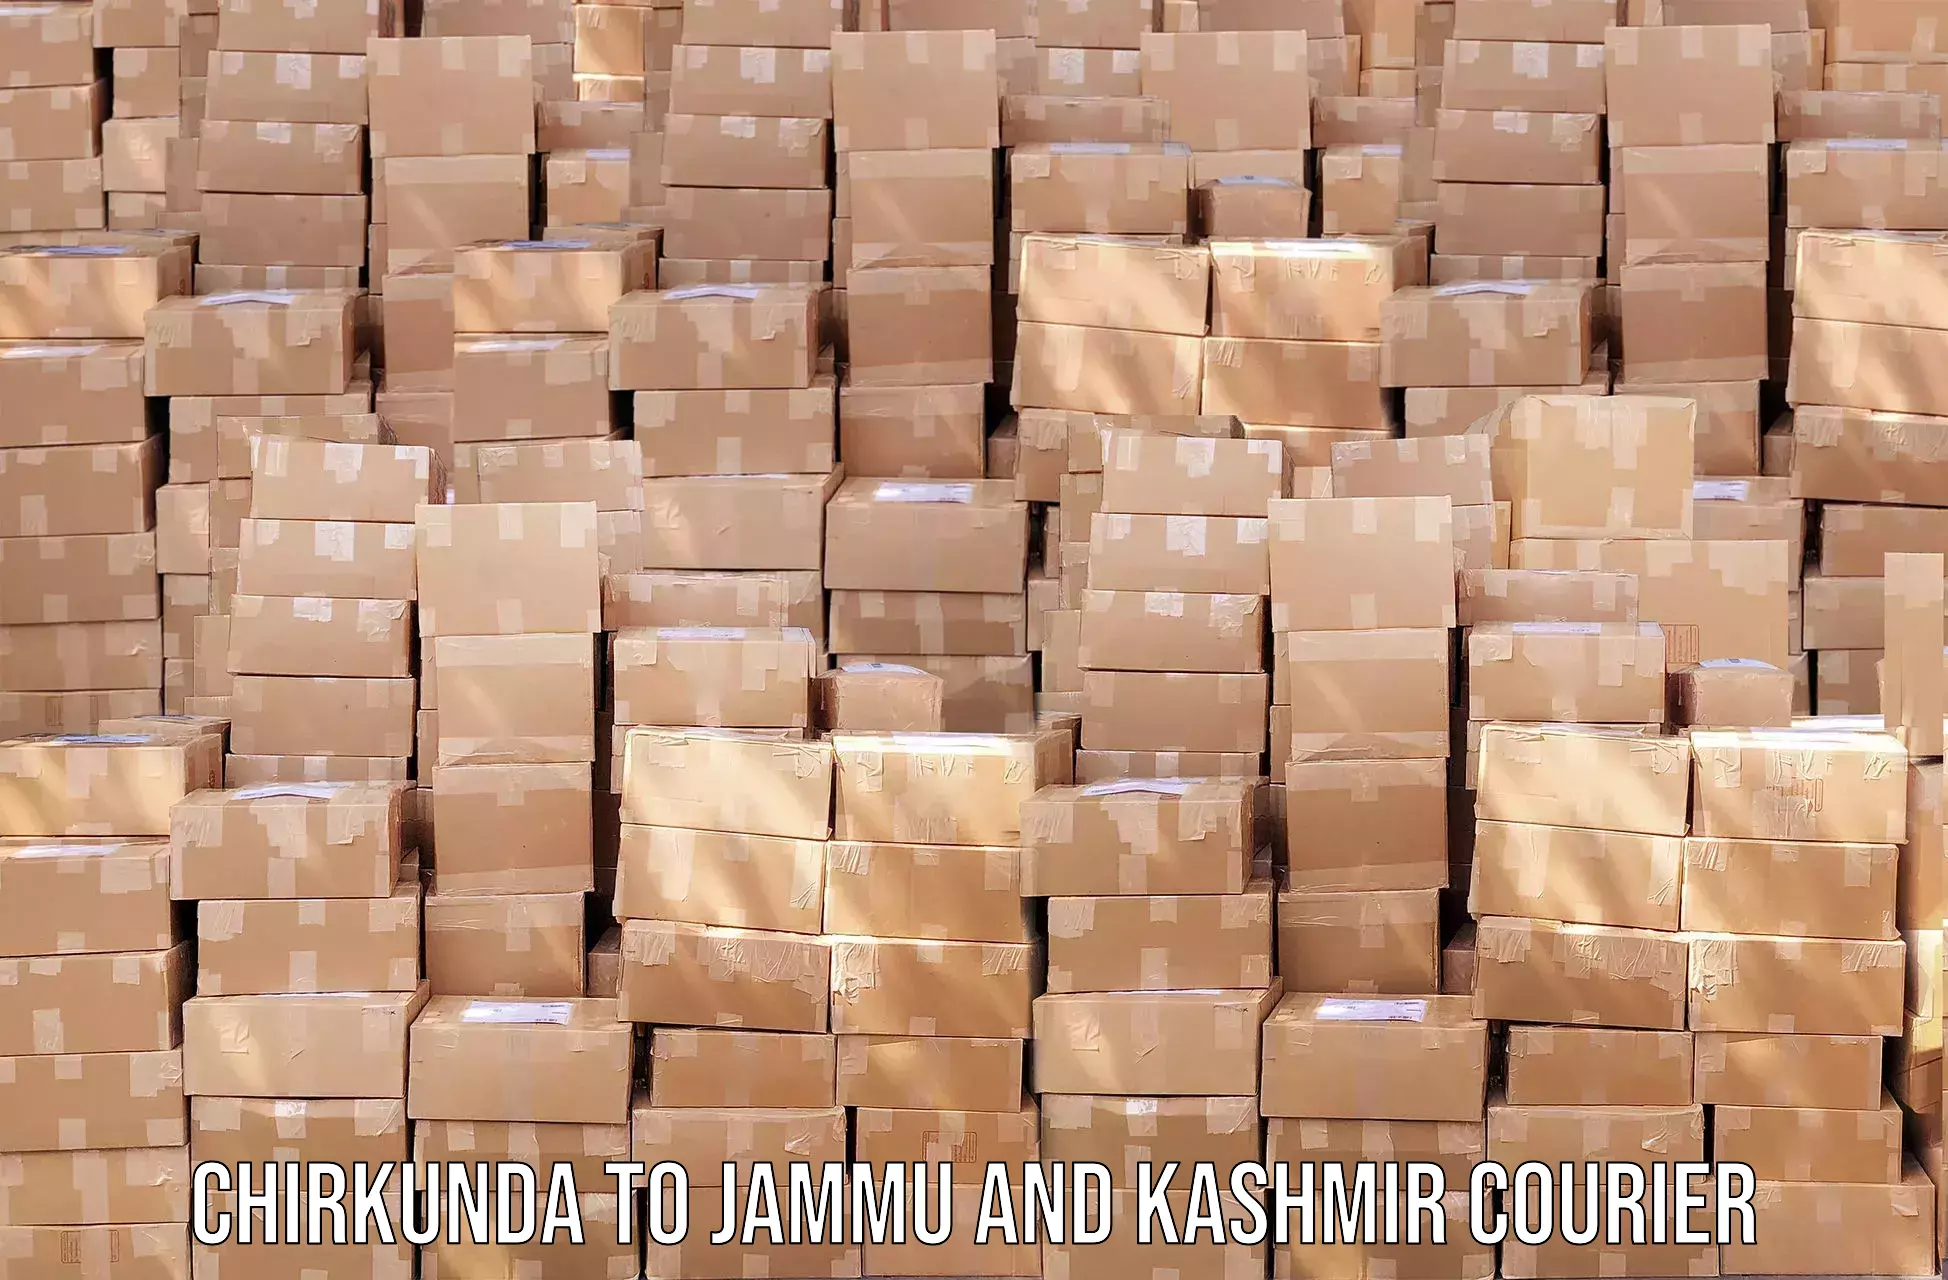 Next-day freight services Chirkunda to Jammu and Kashmir